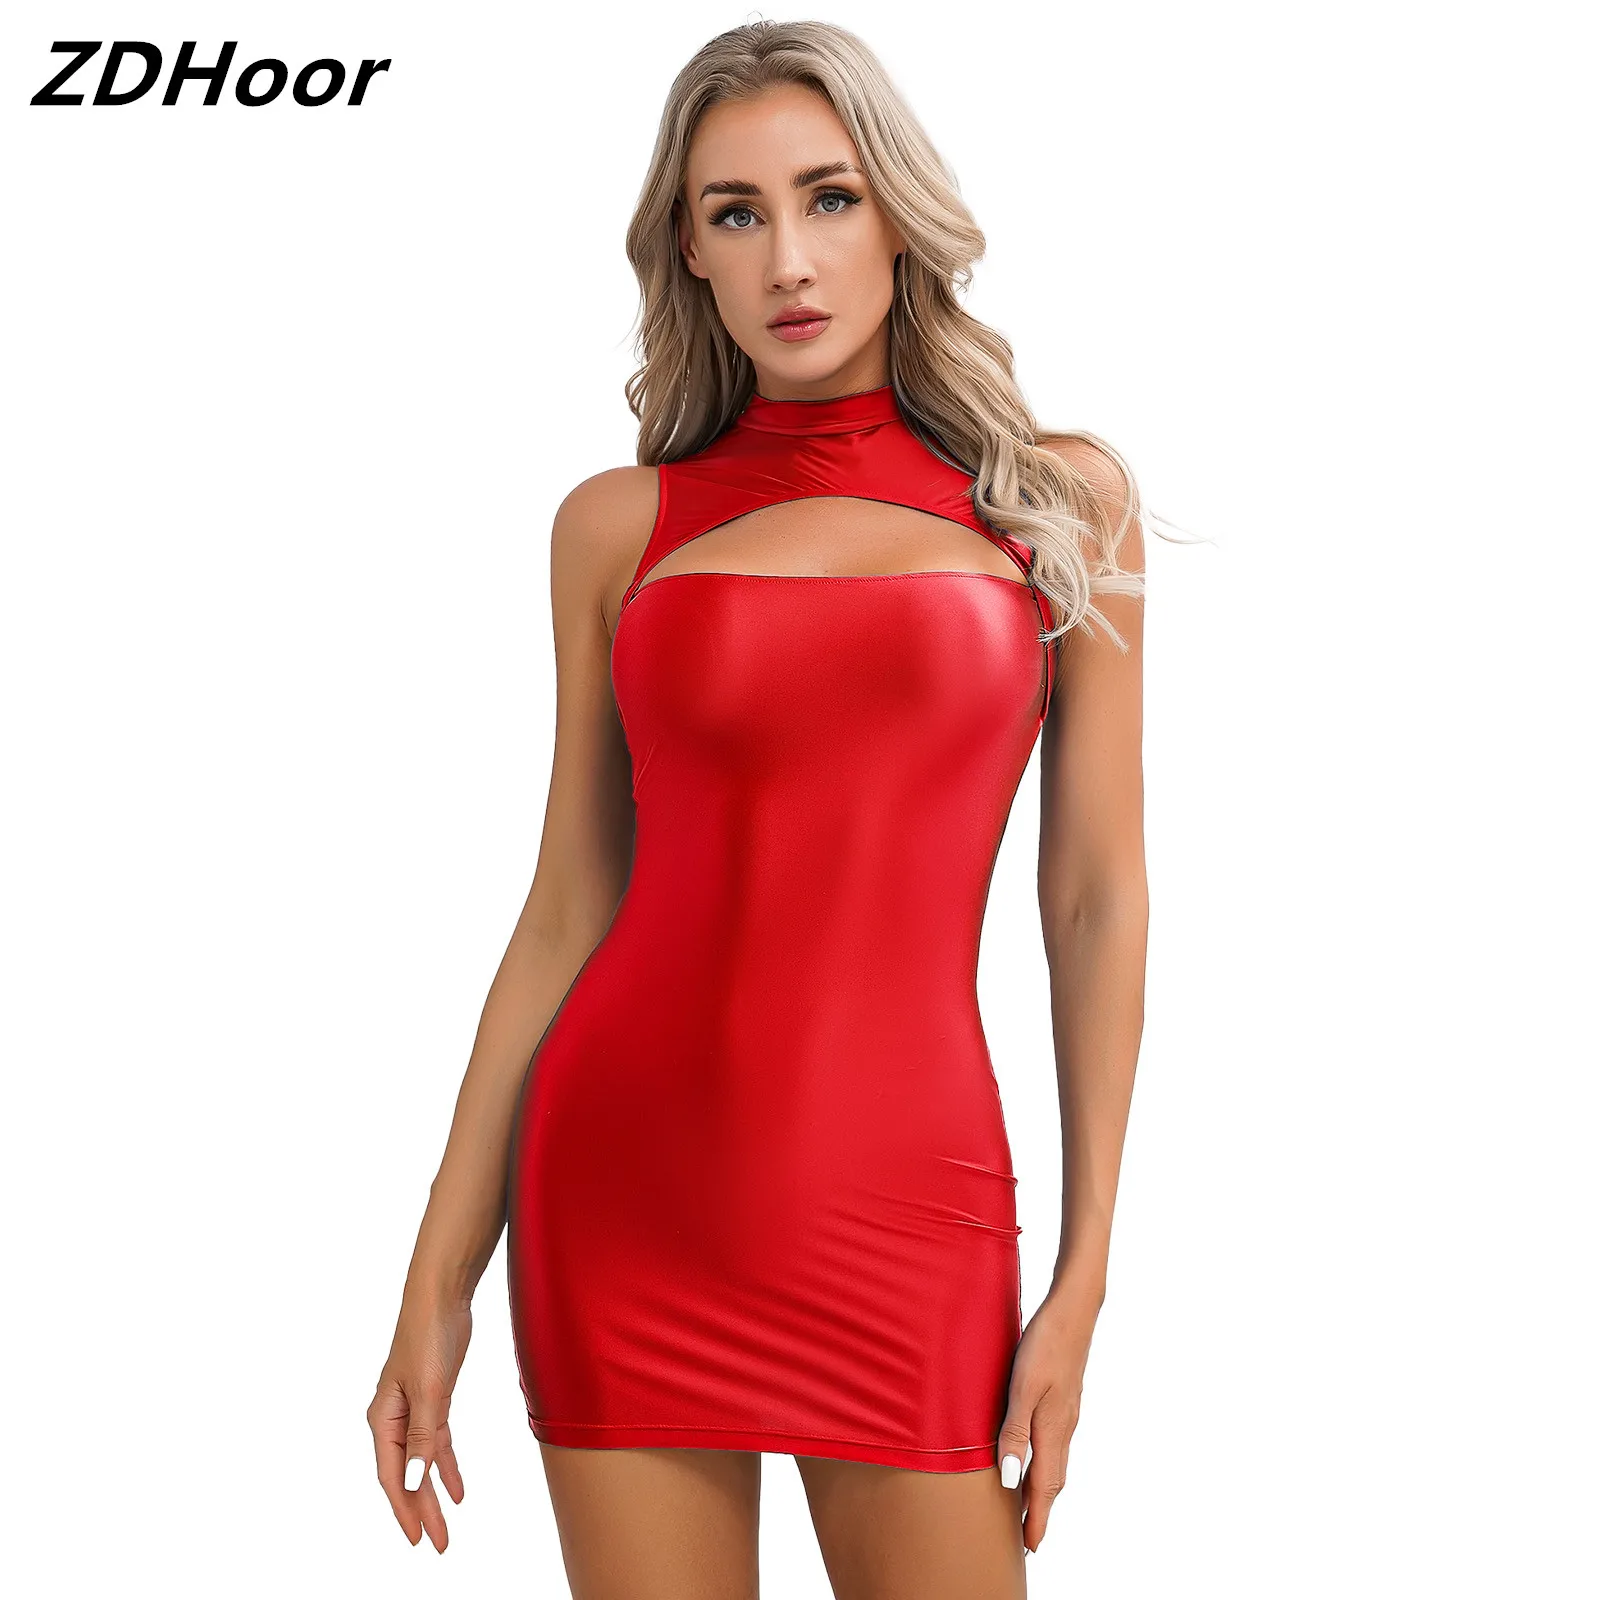 

Women Pencil Dress Smooth Cutout Front Solid Color Glossy Mock Neck Sleeveless Bodycon Dresses for Nightclub Pool Party